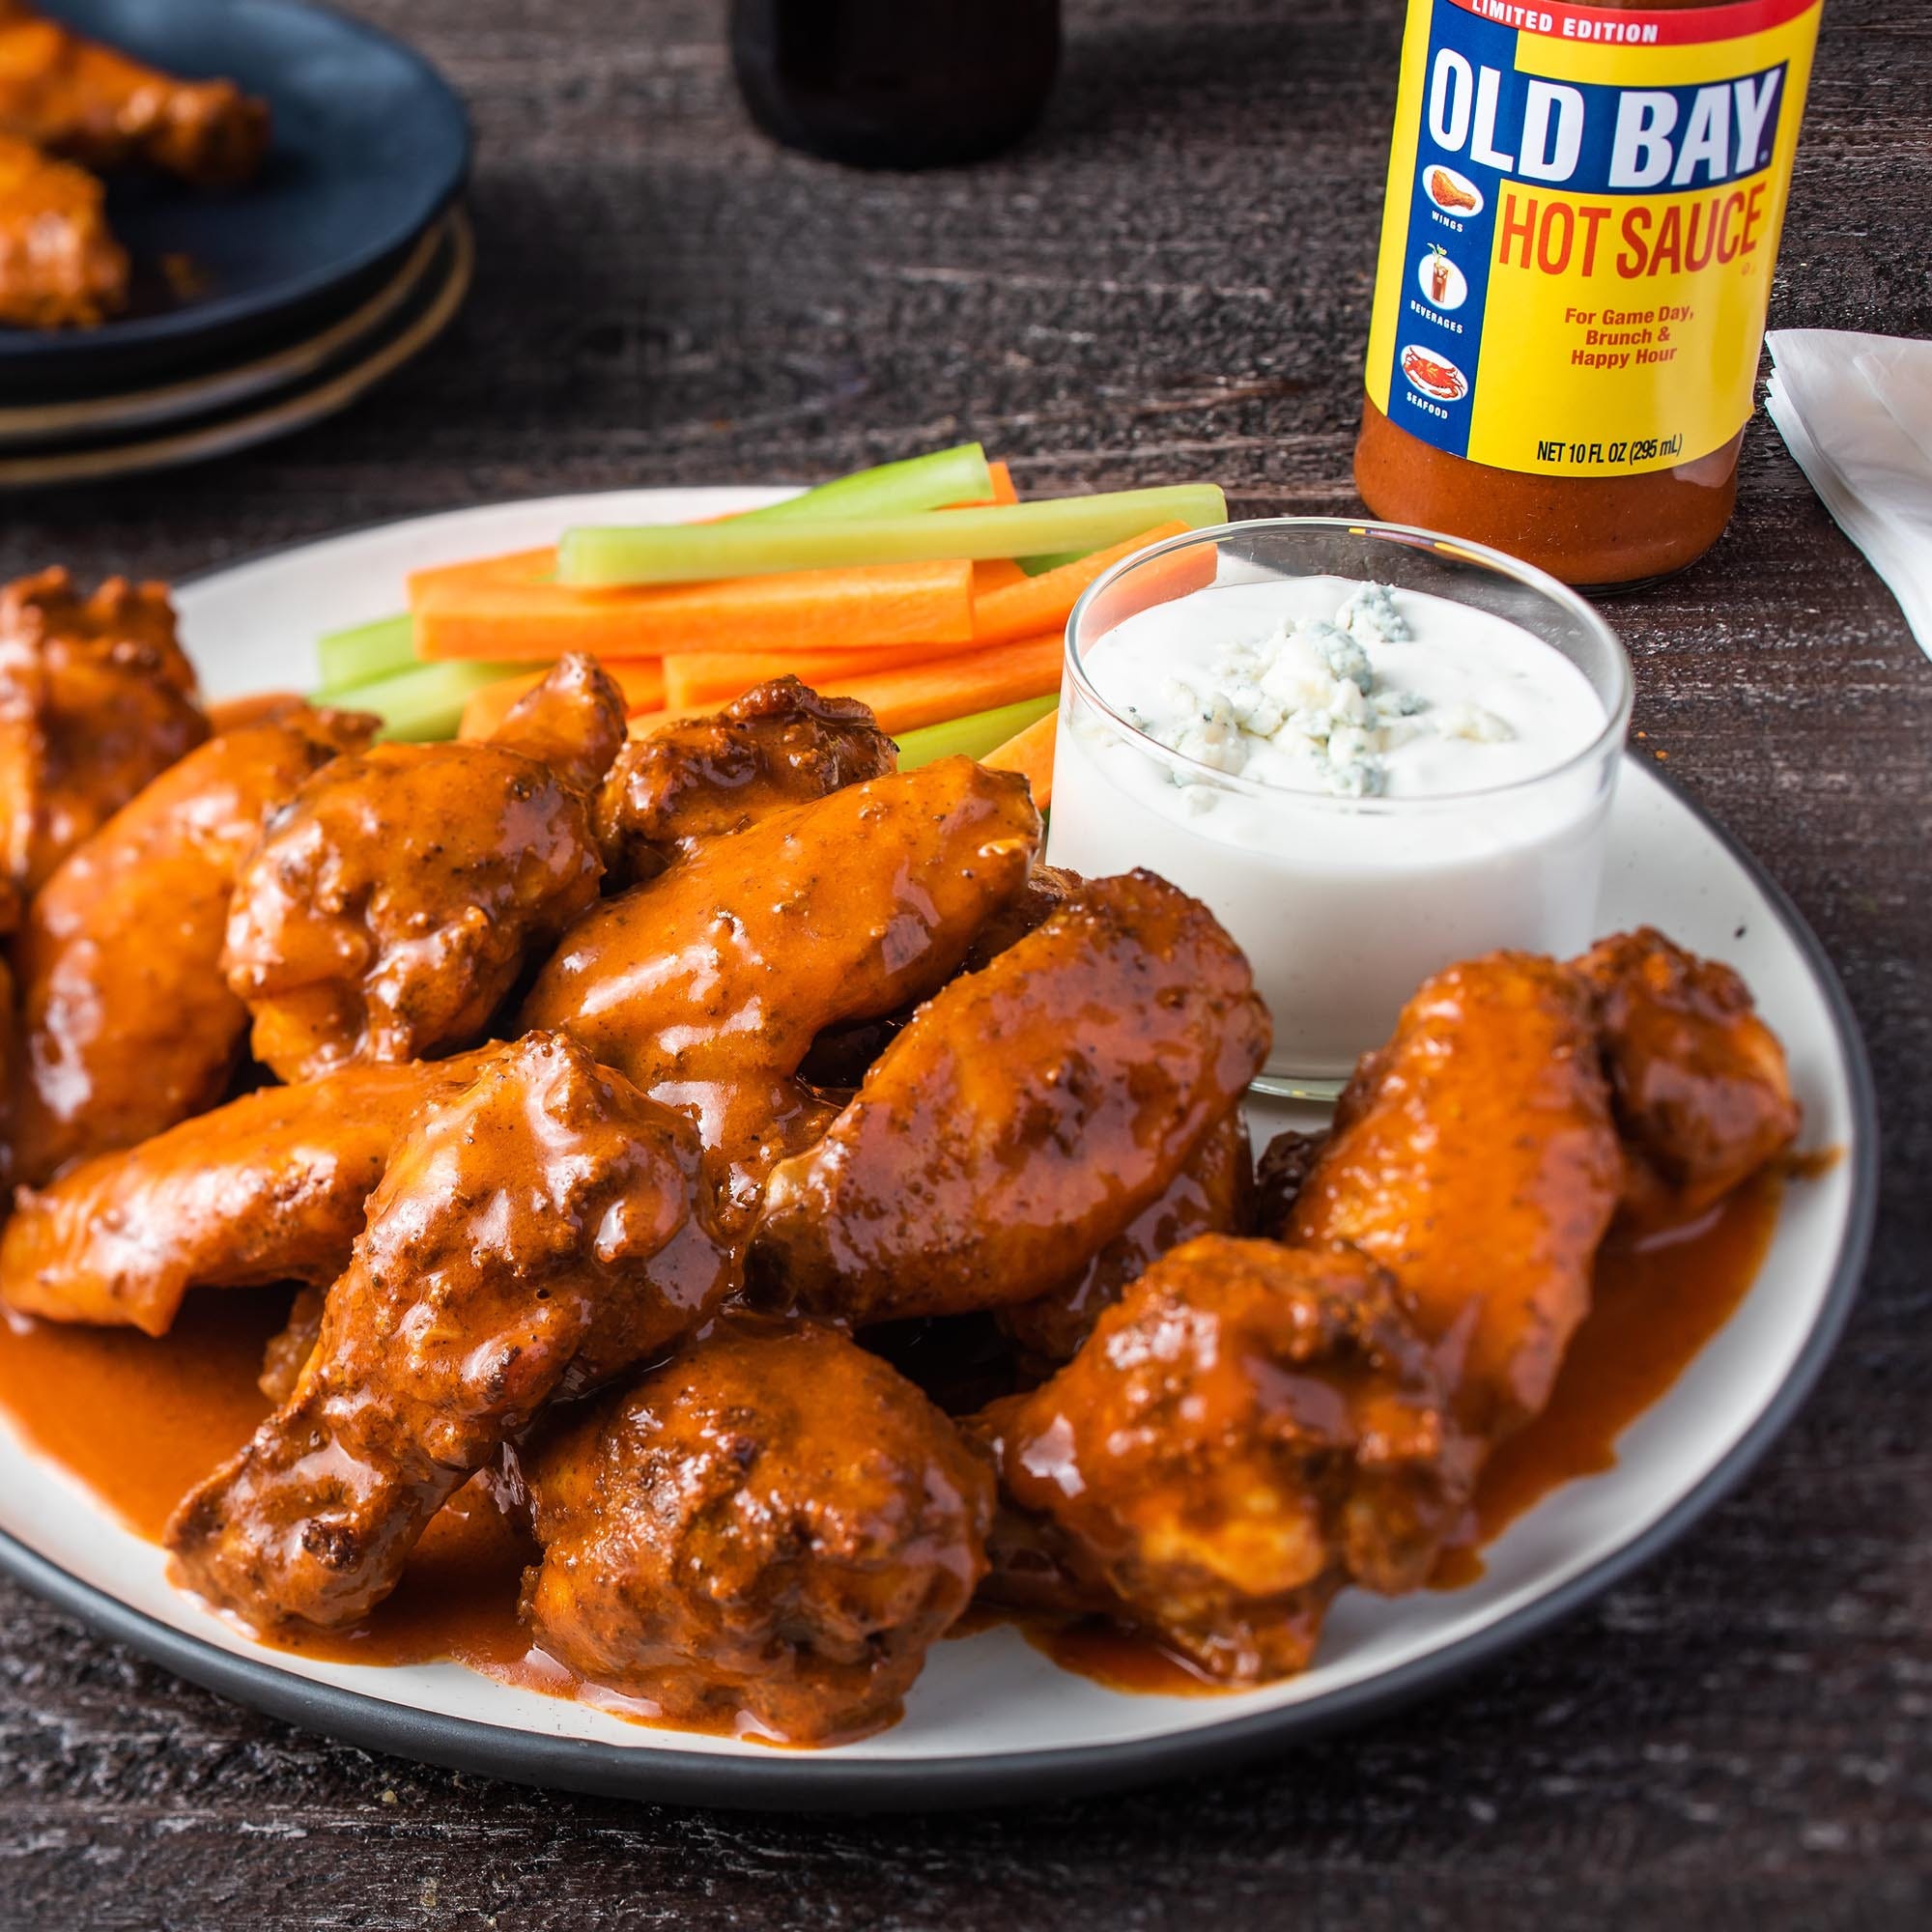 Old Bay hot sauce is now a and here's where to buy